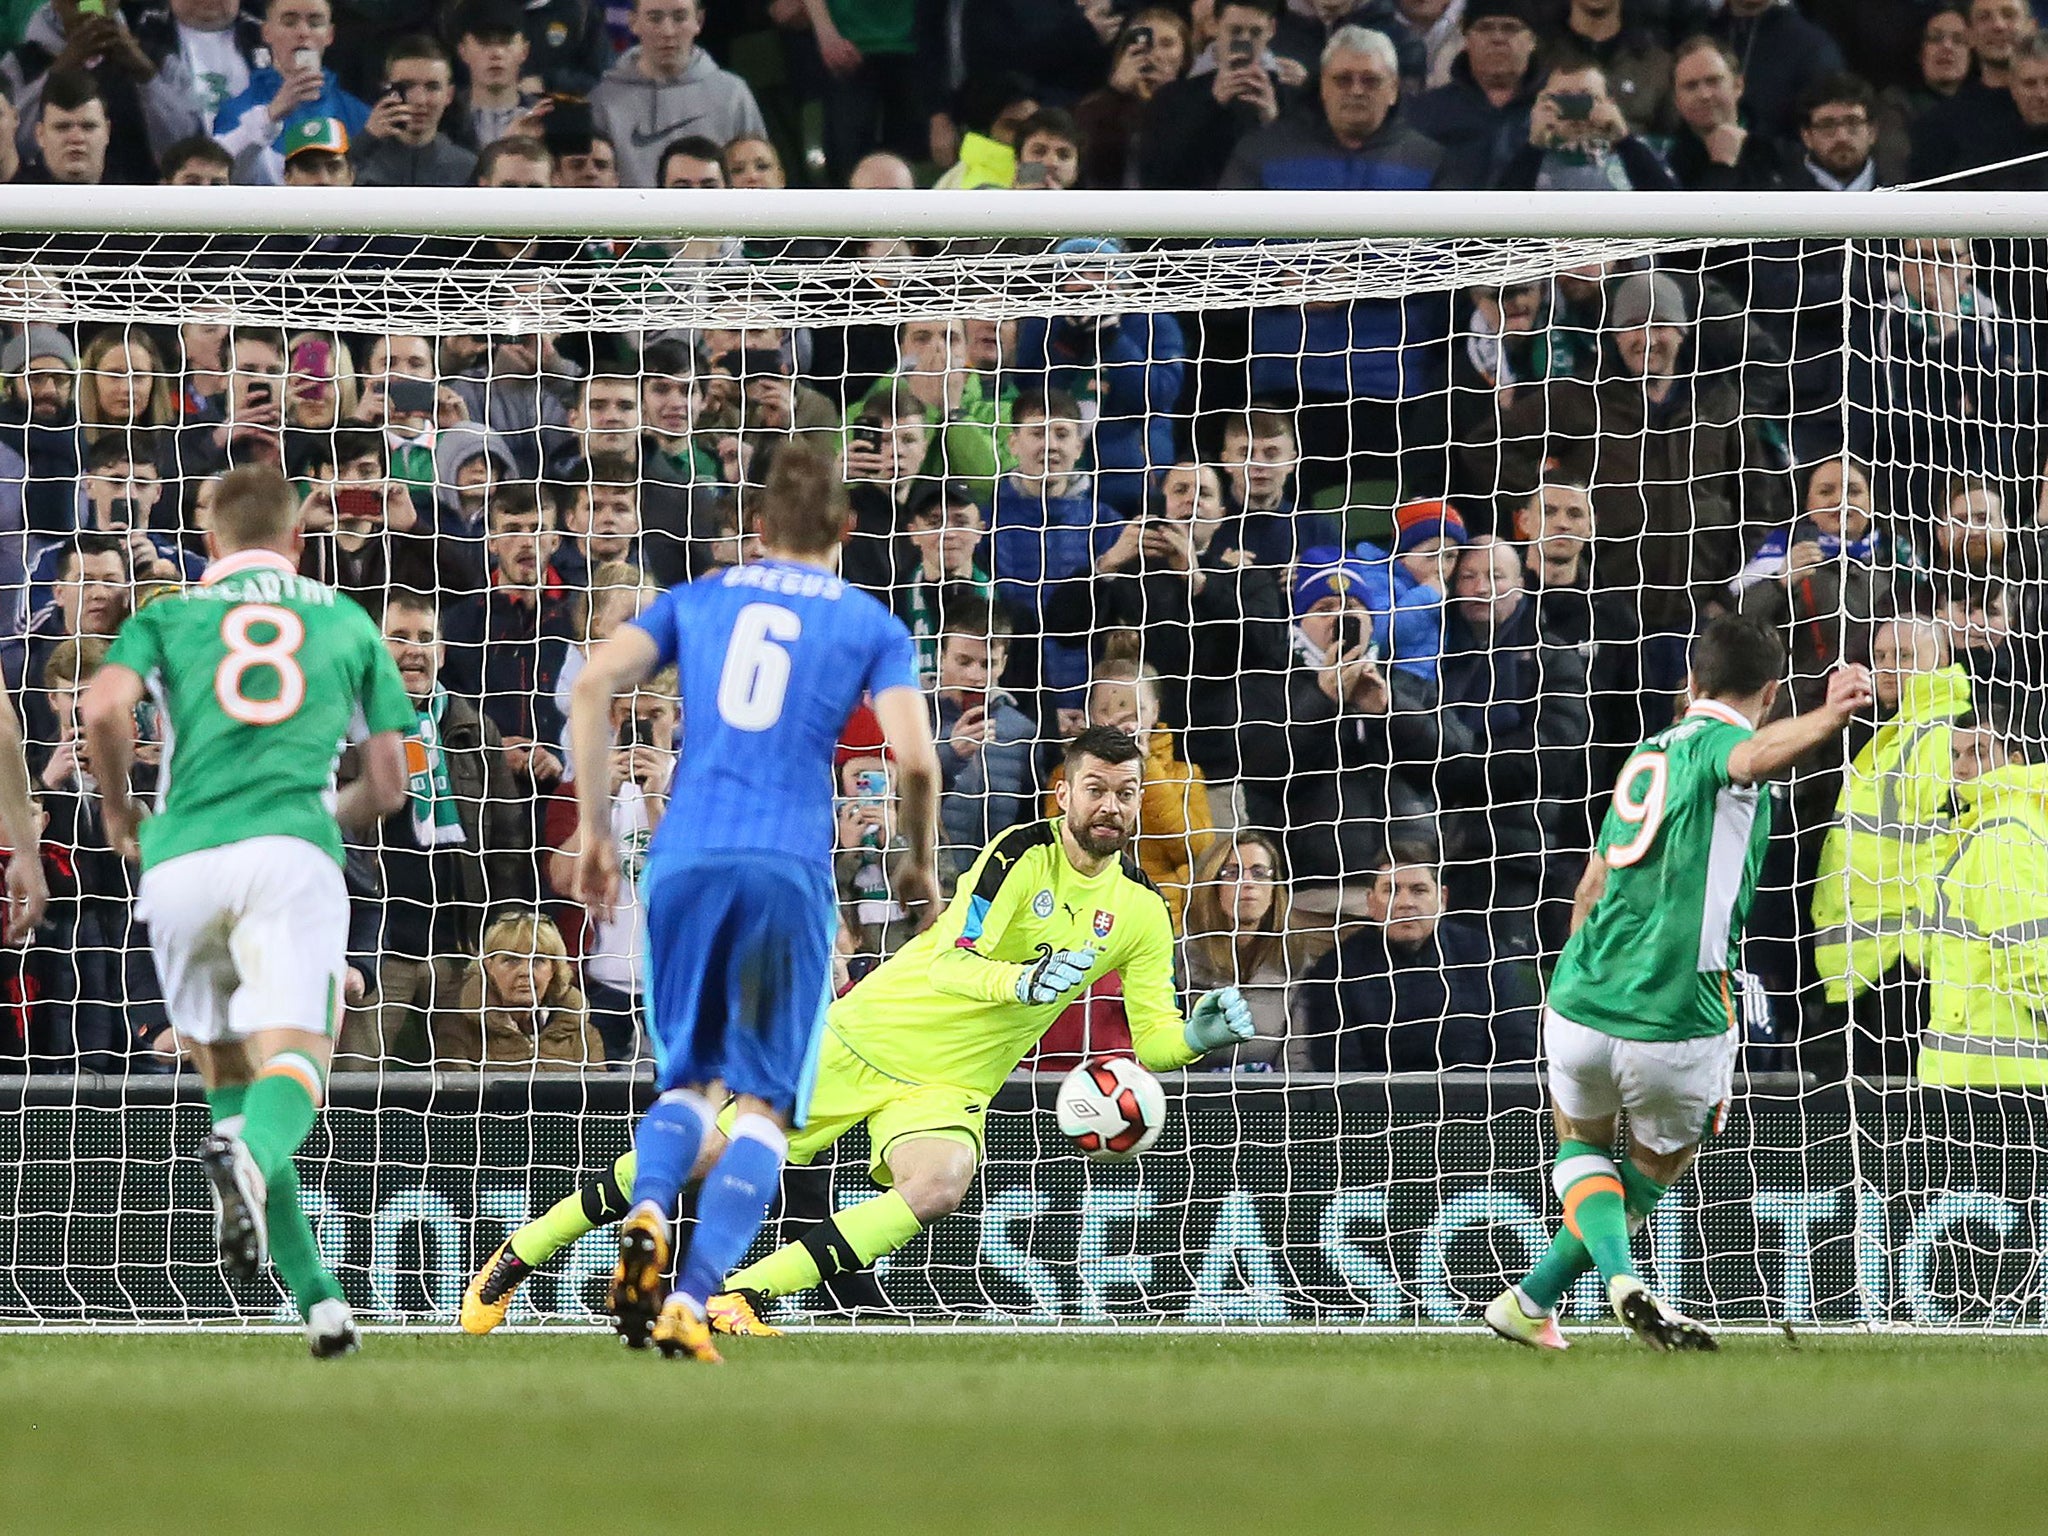 Shane Long scores the opening goal from the penalty spot for Ireland